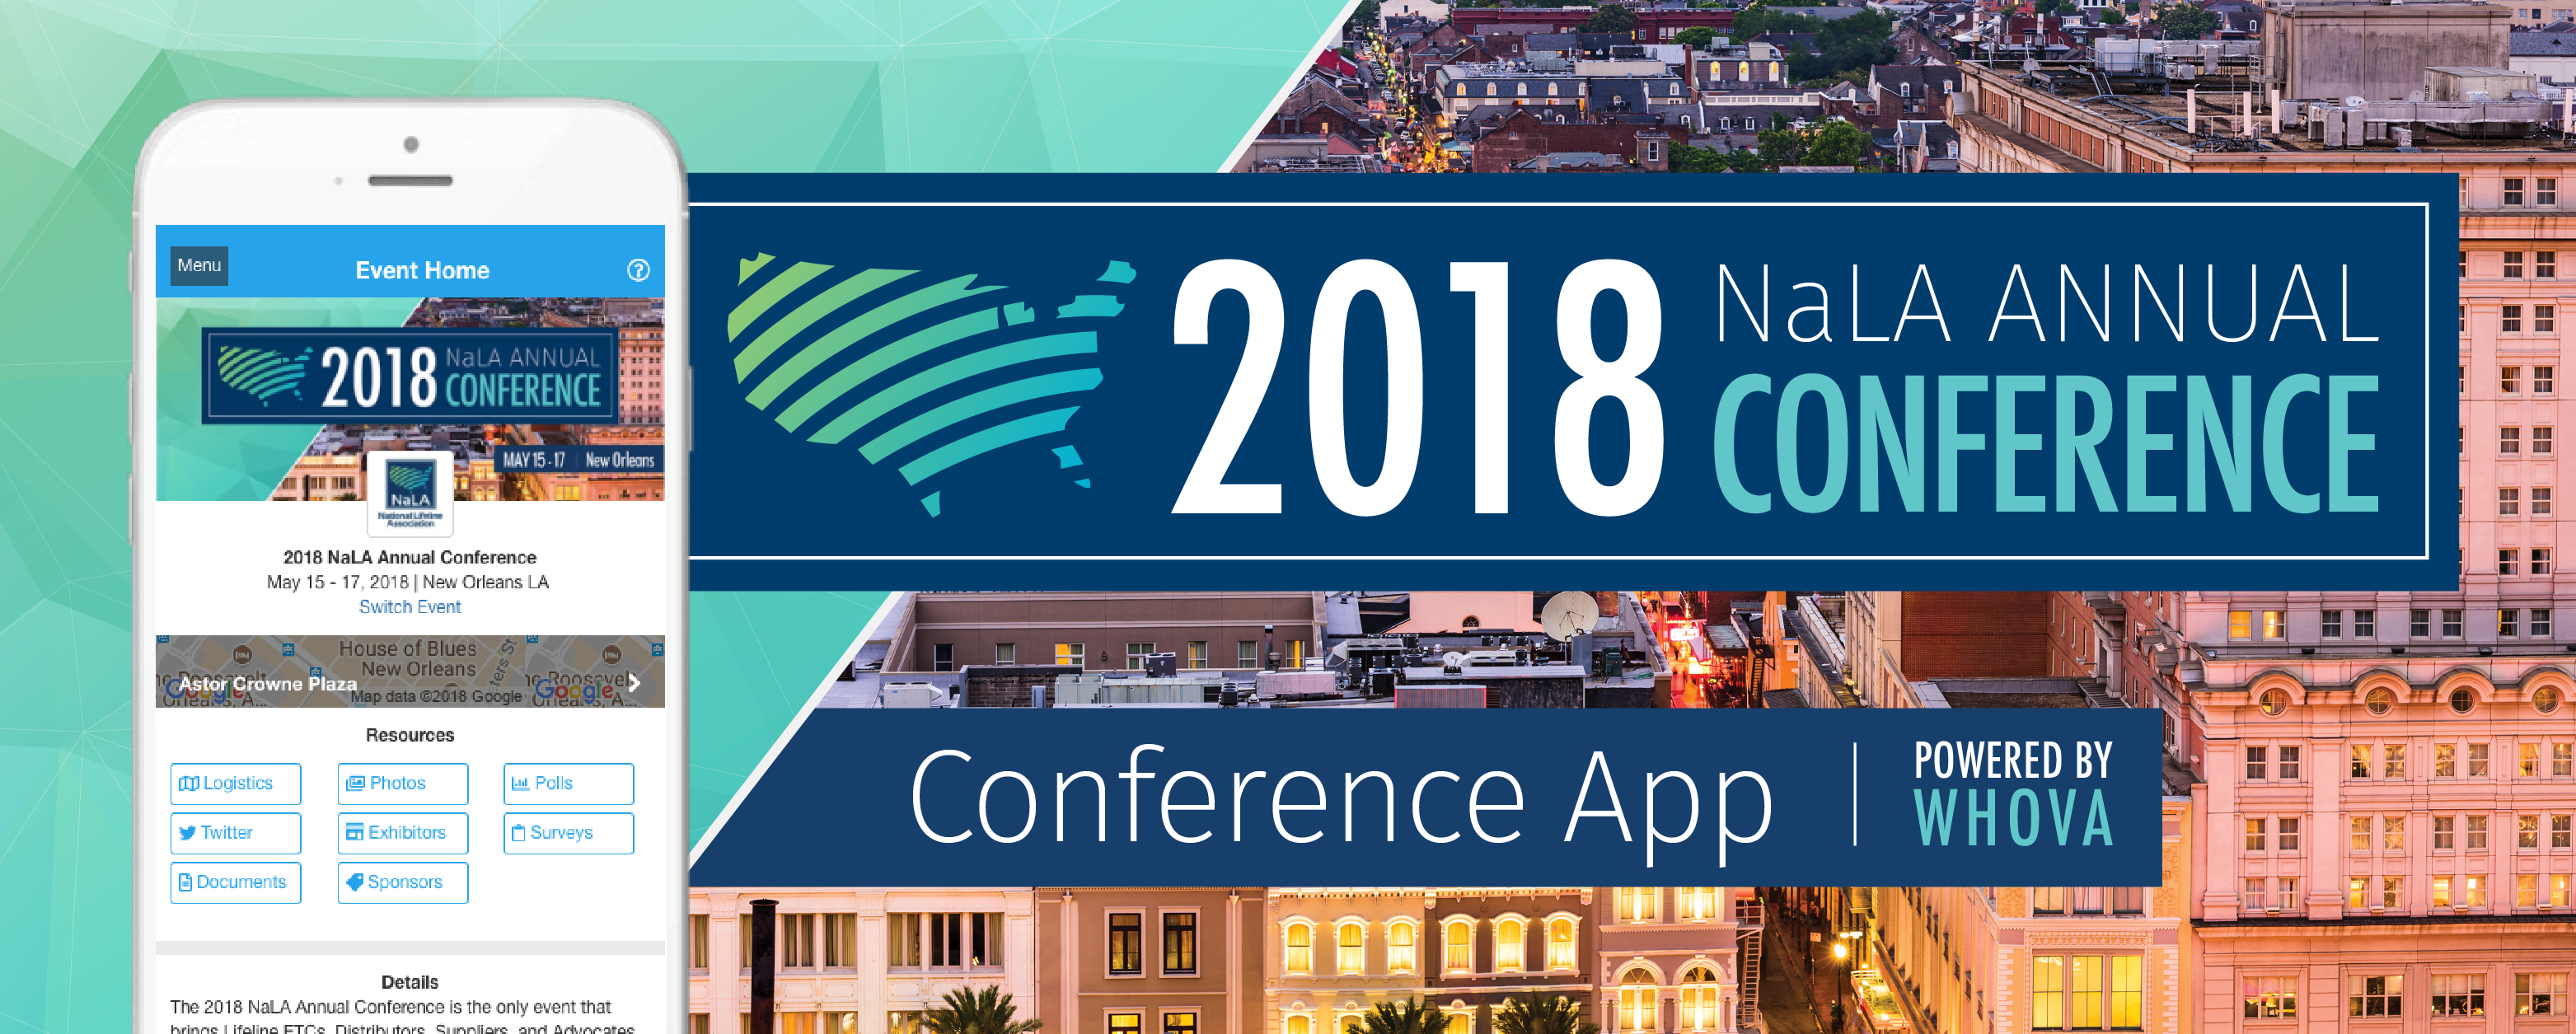 NEW: 2018 NaLA Conference App, Powered by Whova